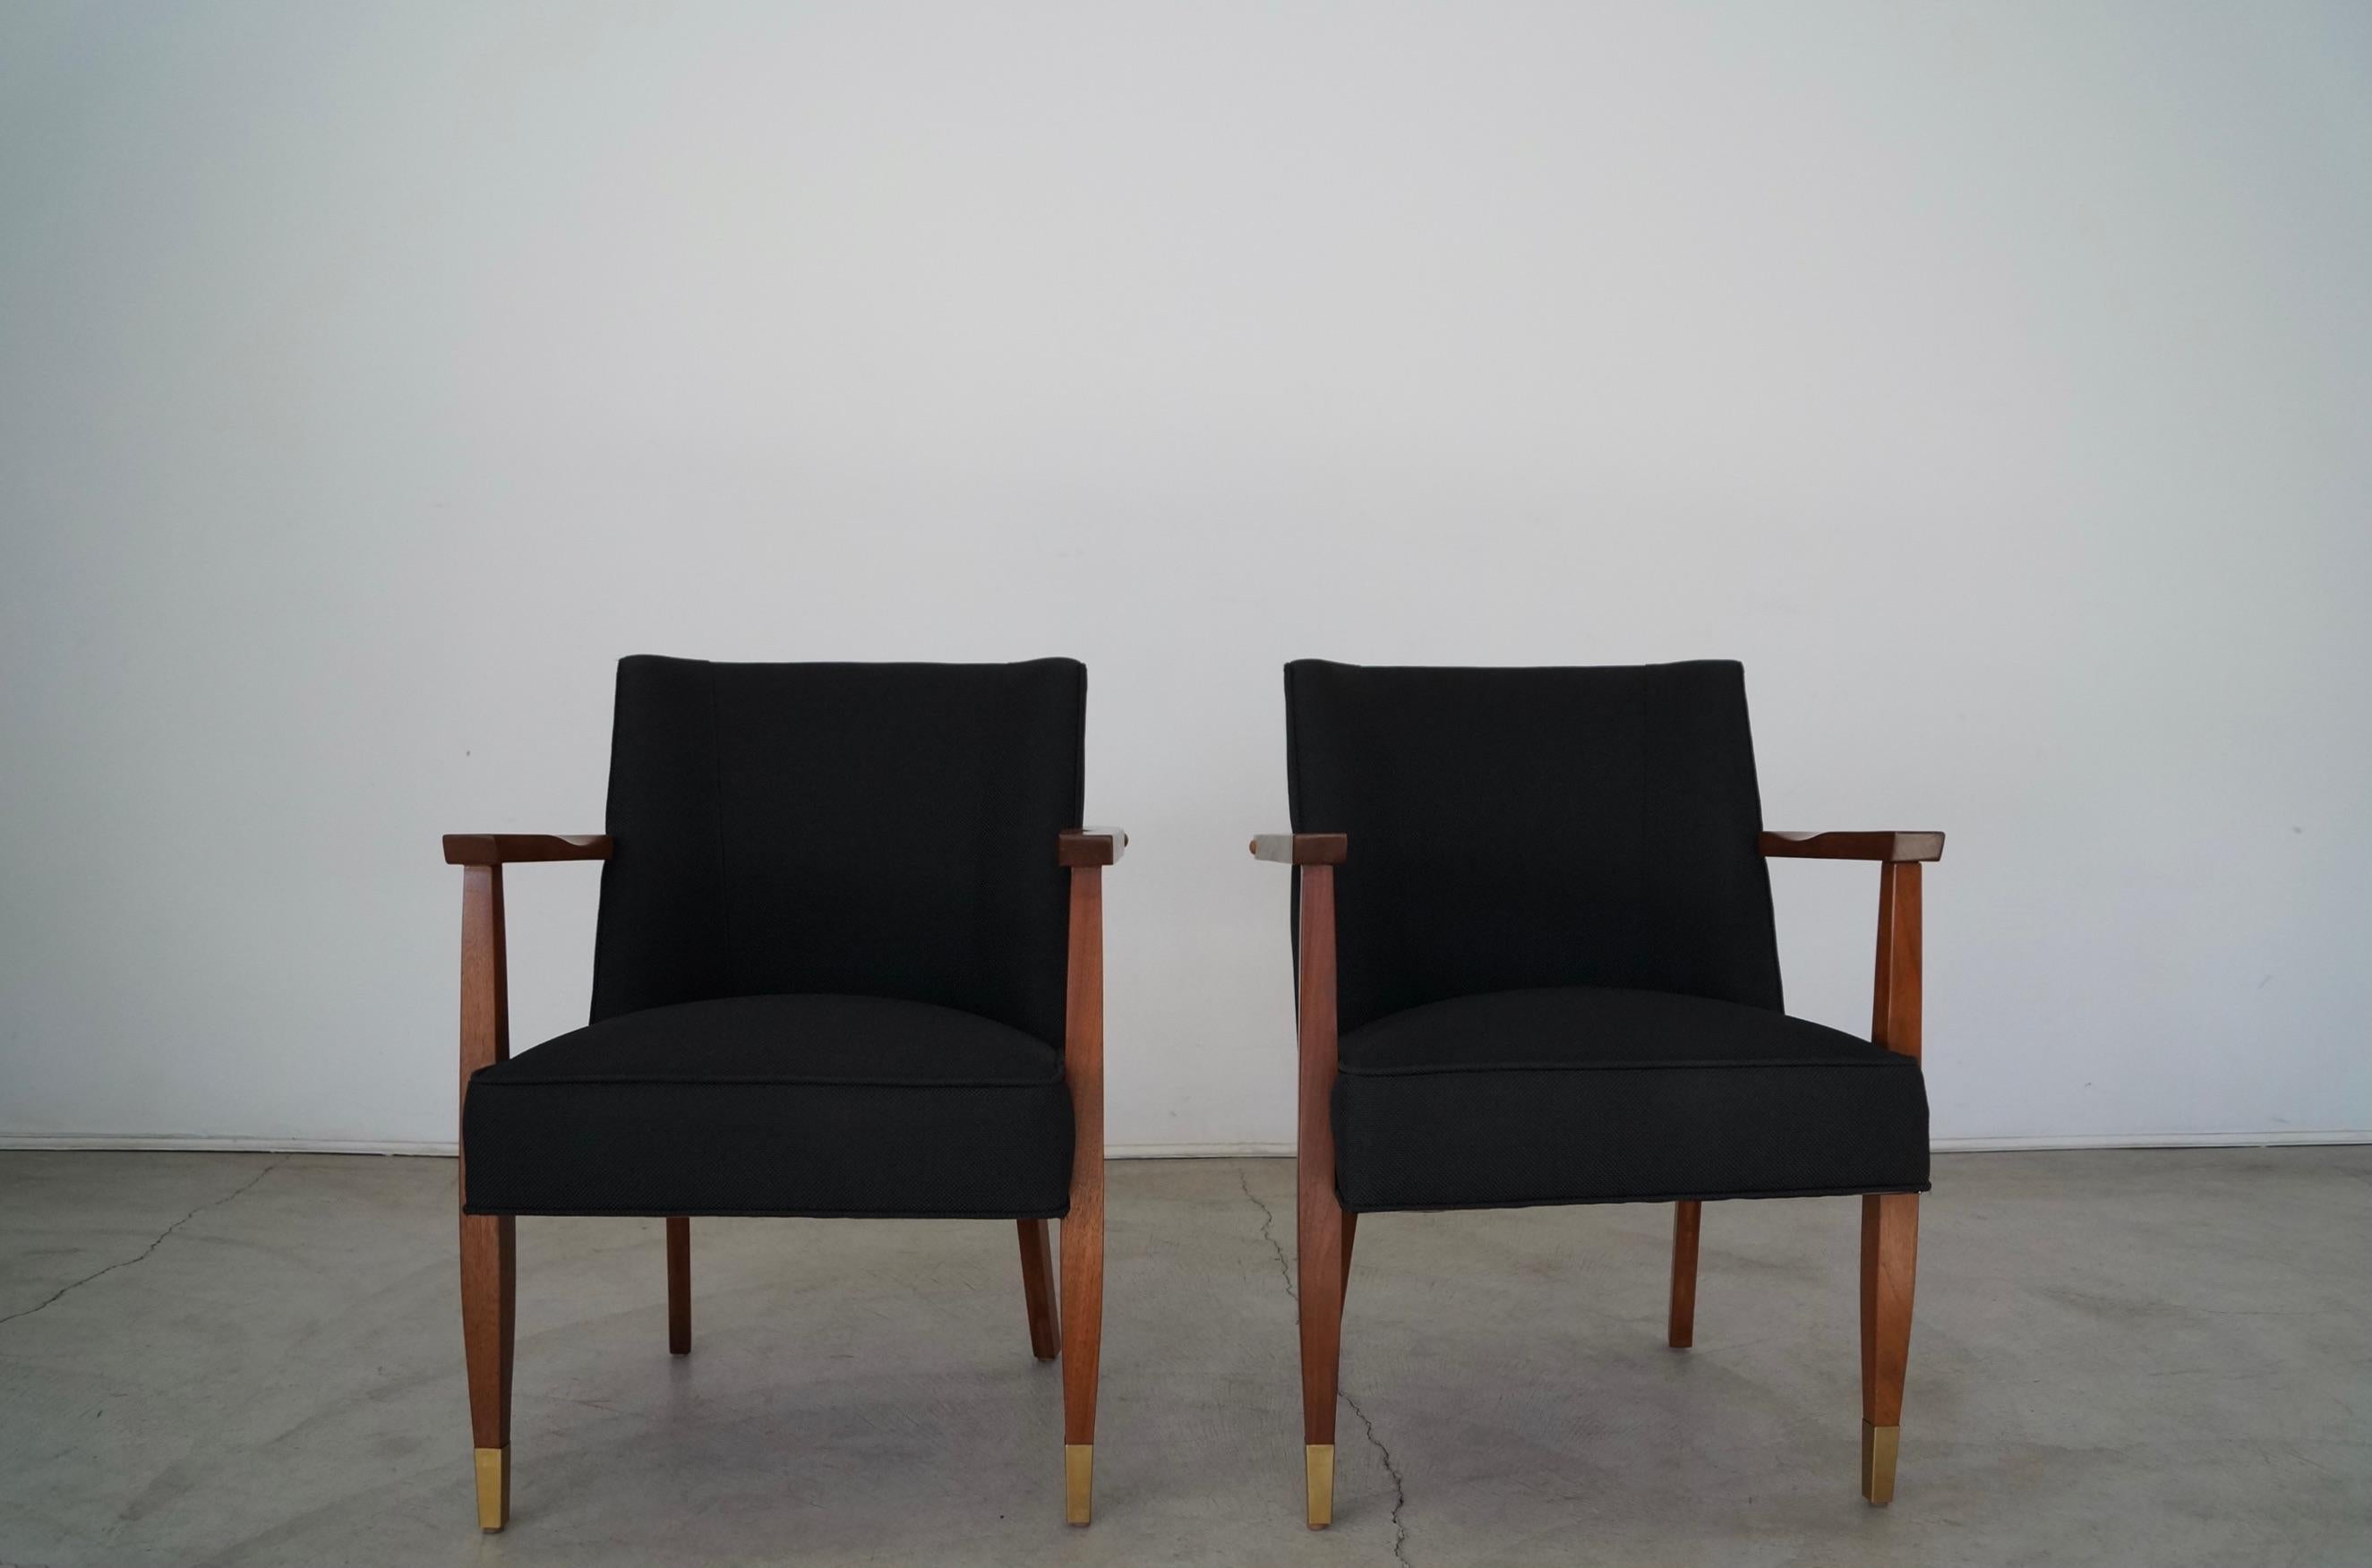 Vintage Mid-Century Modern pair of arm chairs for sale. From the 1950's, and have been professionally restored. They solid walnut frames have been refinished in natural walnut, and have solid brass caps on the tips of the front legs that have been